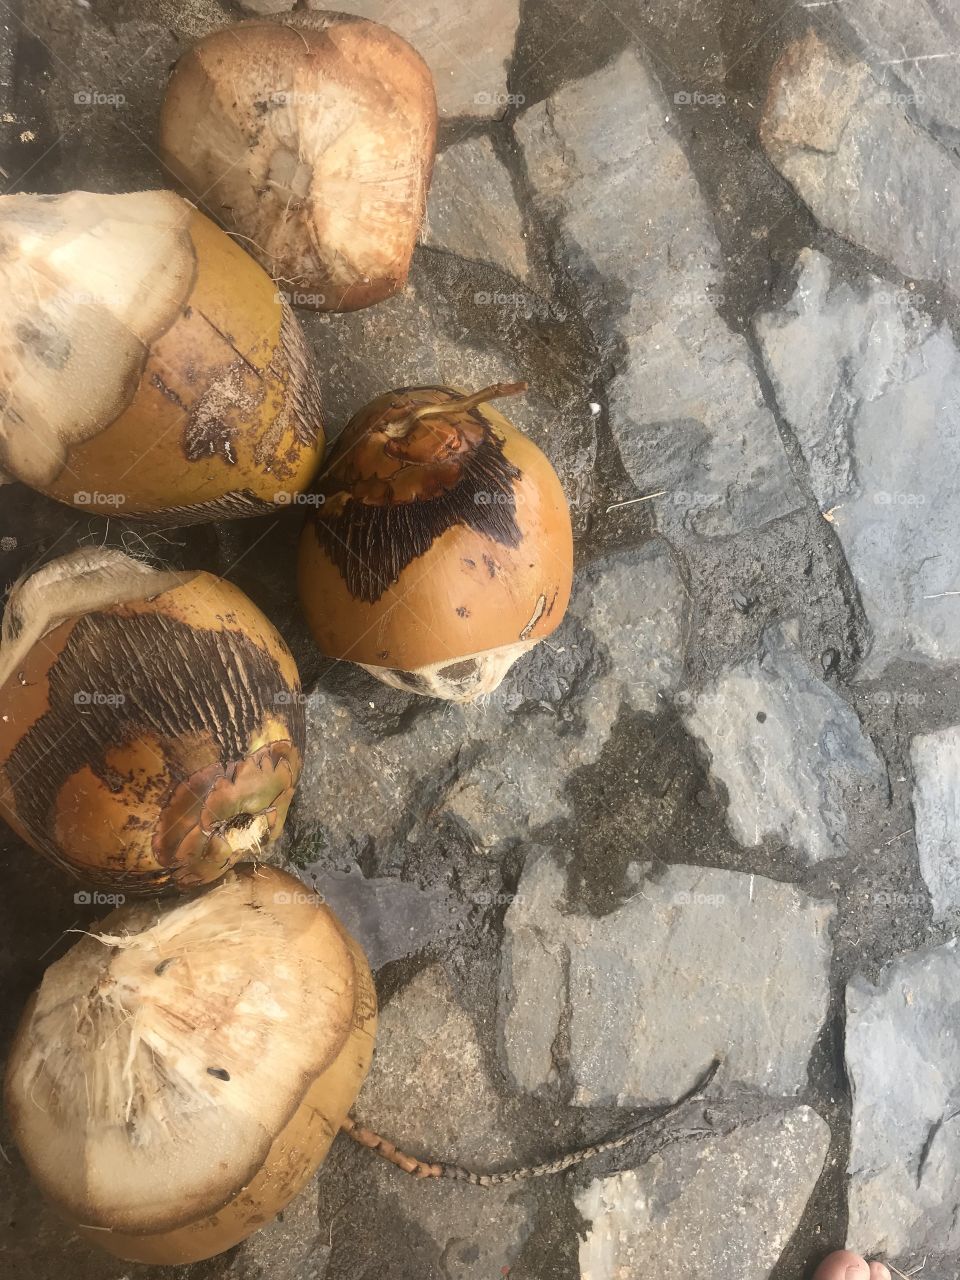 Coconuts freshly prepared for drinking and cooking